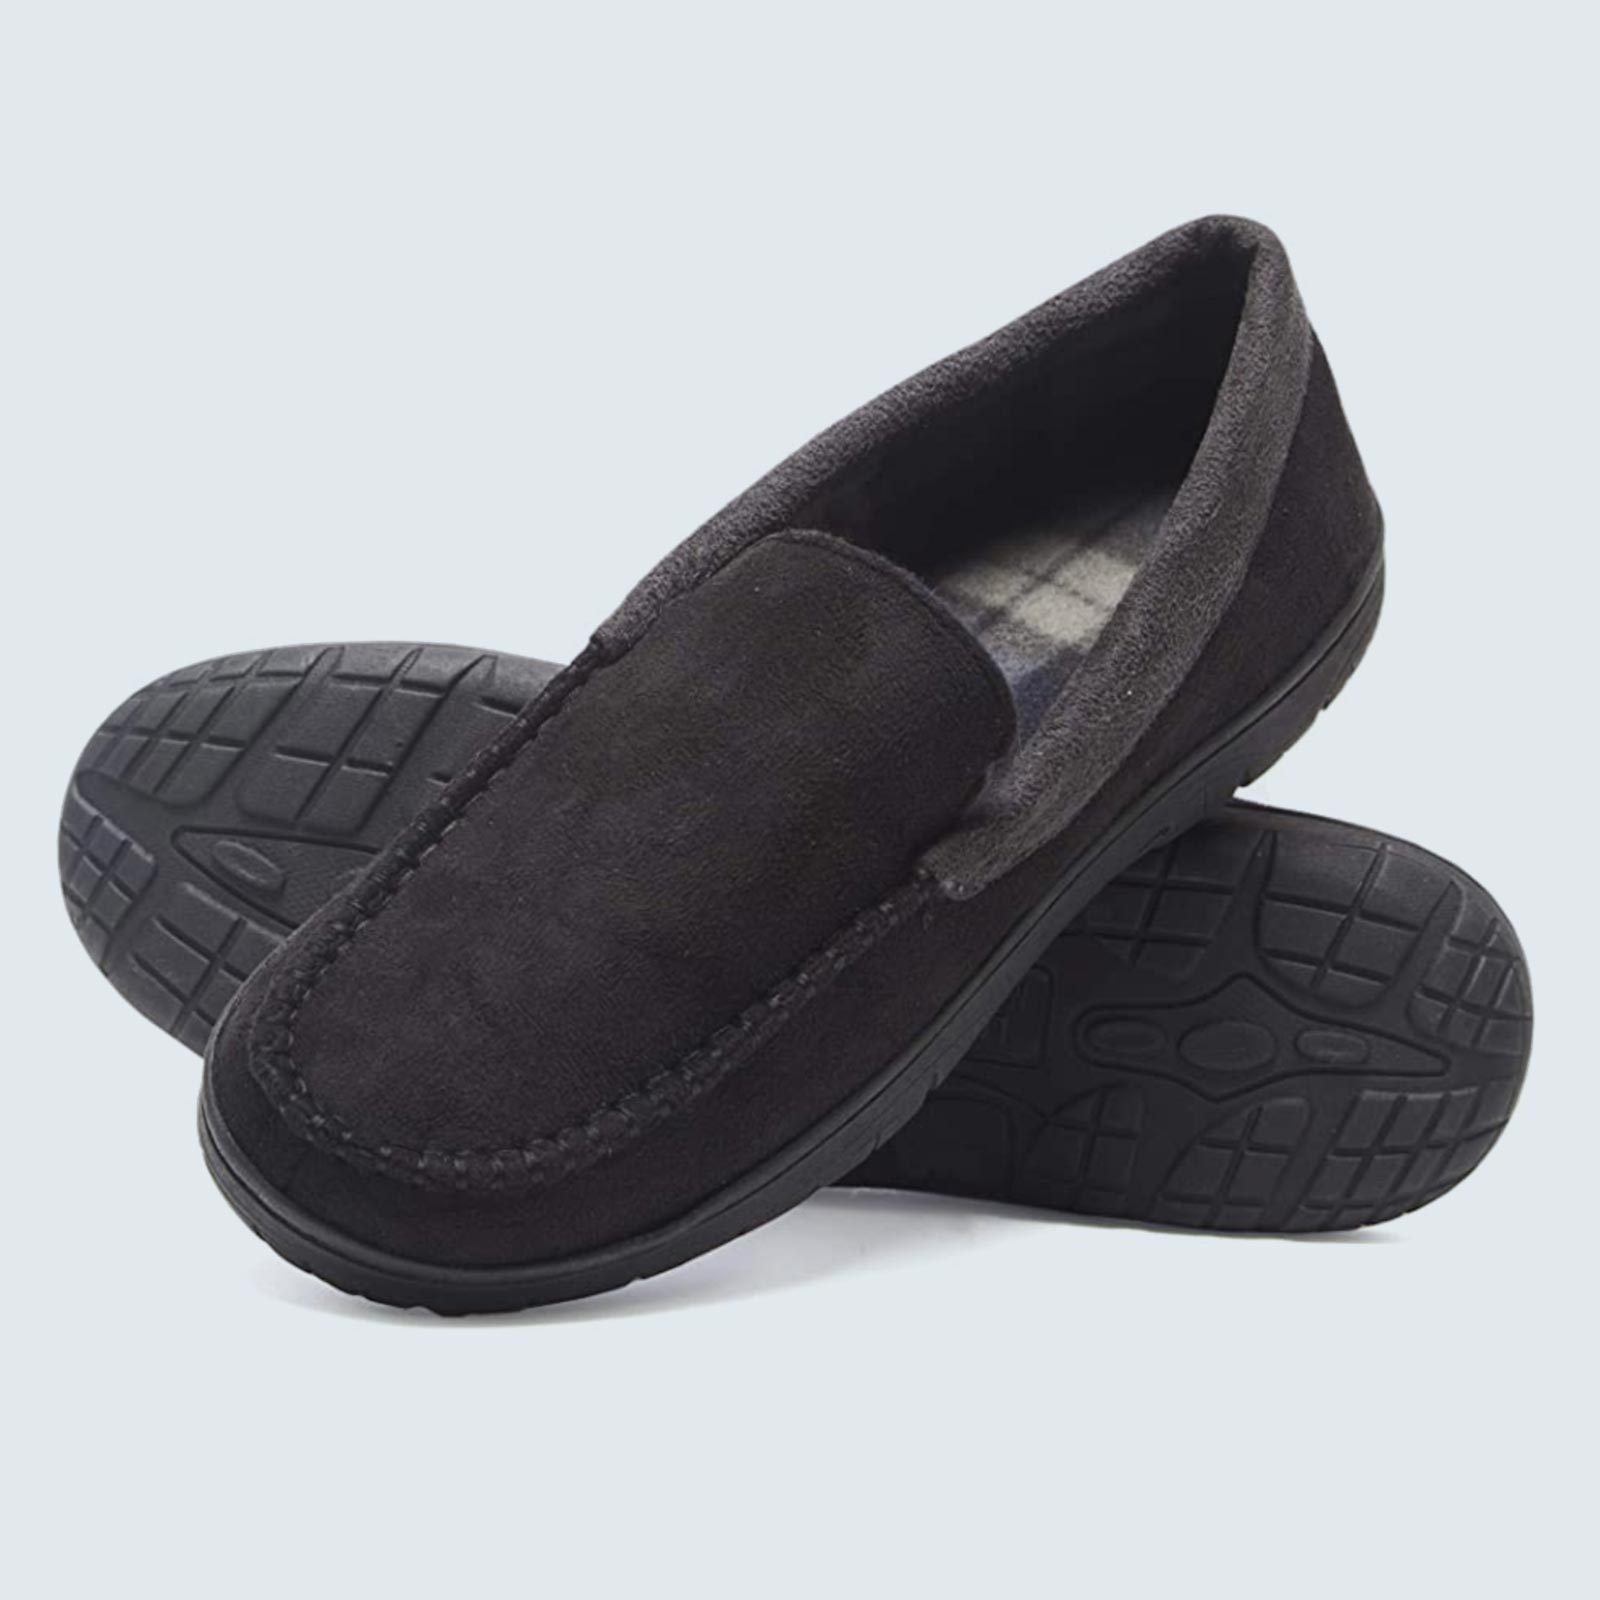 Best Men's Slippers 2021 | Comfy Men's the House More